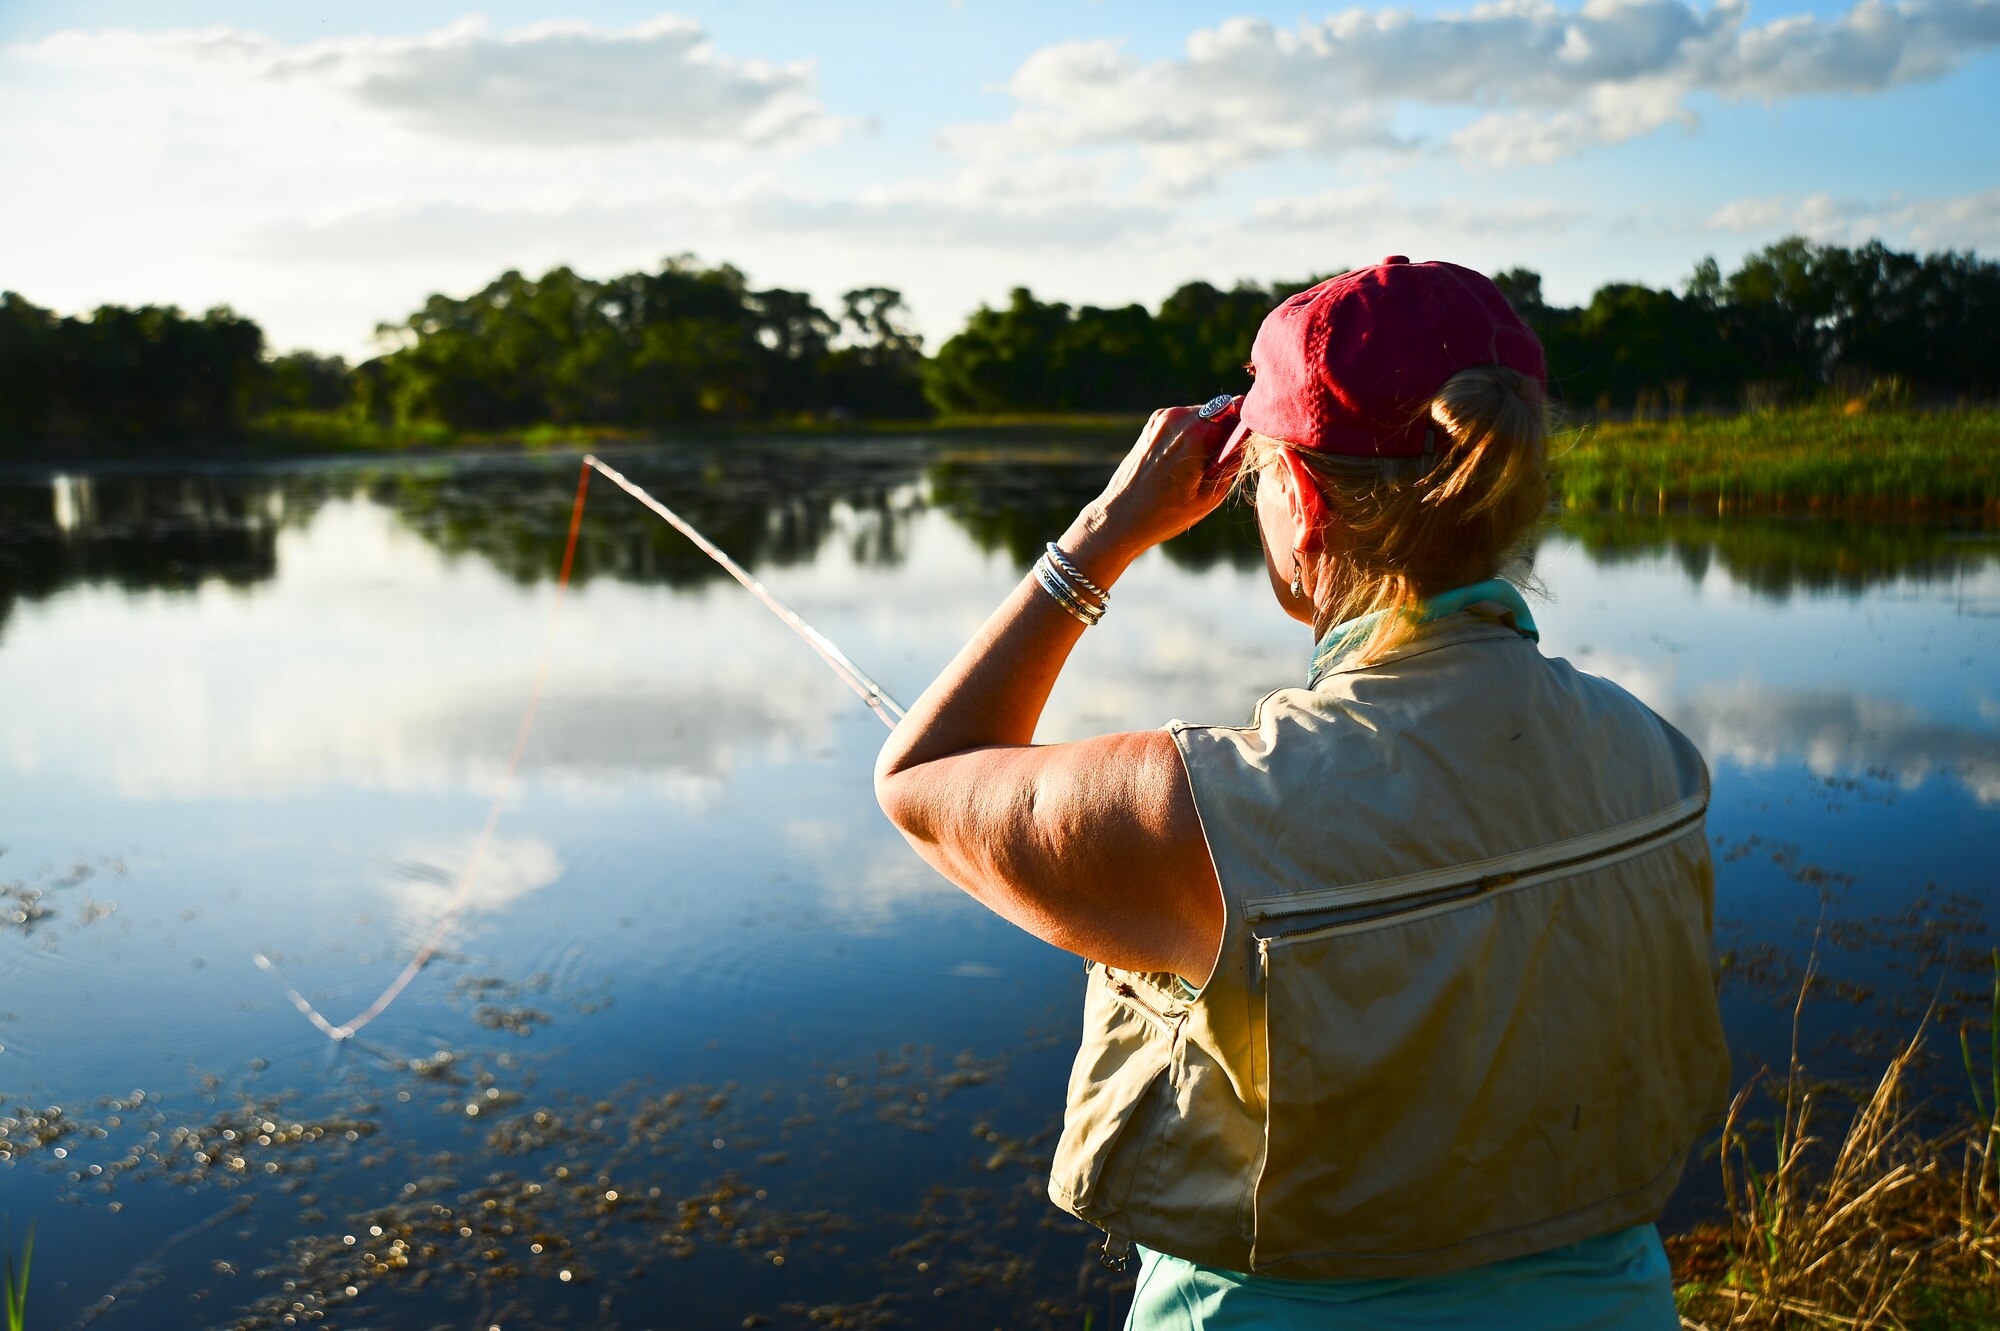 Deborah Brooks, Project Healing Waters Fly Fishing Tampa lead, demonstrates proper casting techniques during a class held at MacDill Air Force Base, April 17, 2014. Events like these are the backbone of the program; they give individuals the confidence to get out of their comfort zones and meet new people. With this, they are able to condition their mental and physical ailments in an environment that is relaxing and easy to enjoy from nearly anywhere. (U.S. Air Force photo by Staff Sgt. Brandon Shapiro/Released)